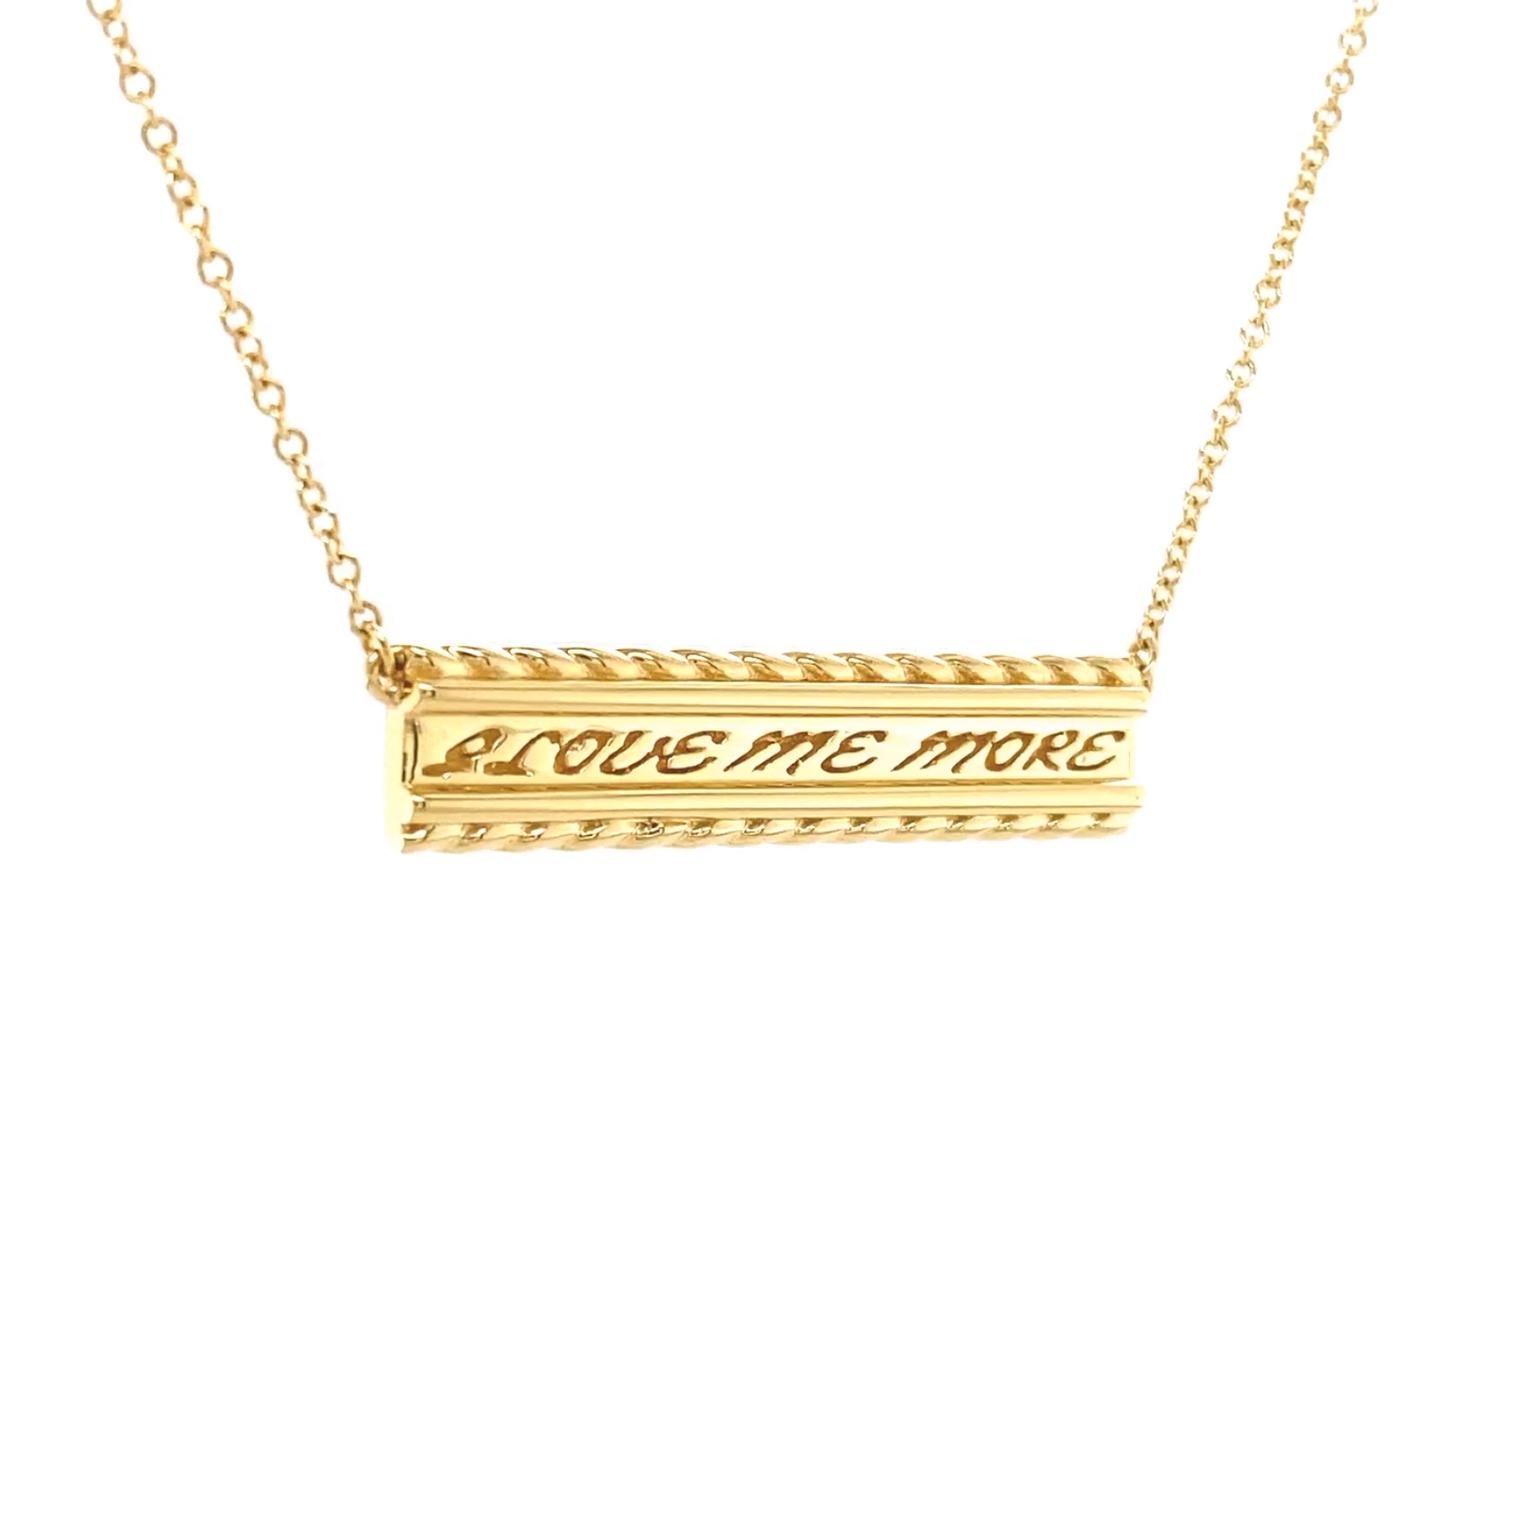 Valentin Magro Yellow Gold I Love Me More Bar Pendant carries a gleaming message. The body is 18k yellow gold shaped into an elongated bar. Twisted wires placed widthwise bring texture to the design. Between them stretch the words 'I love me more'